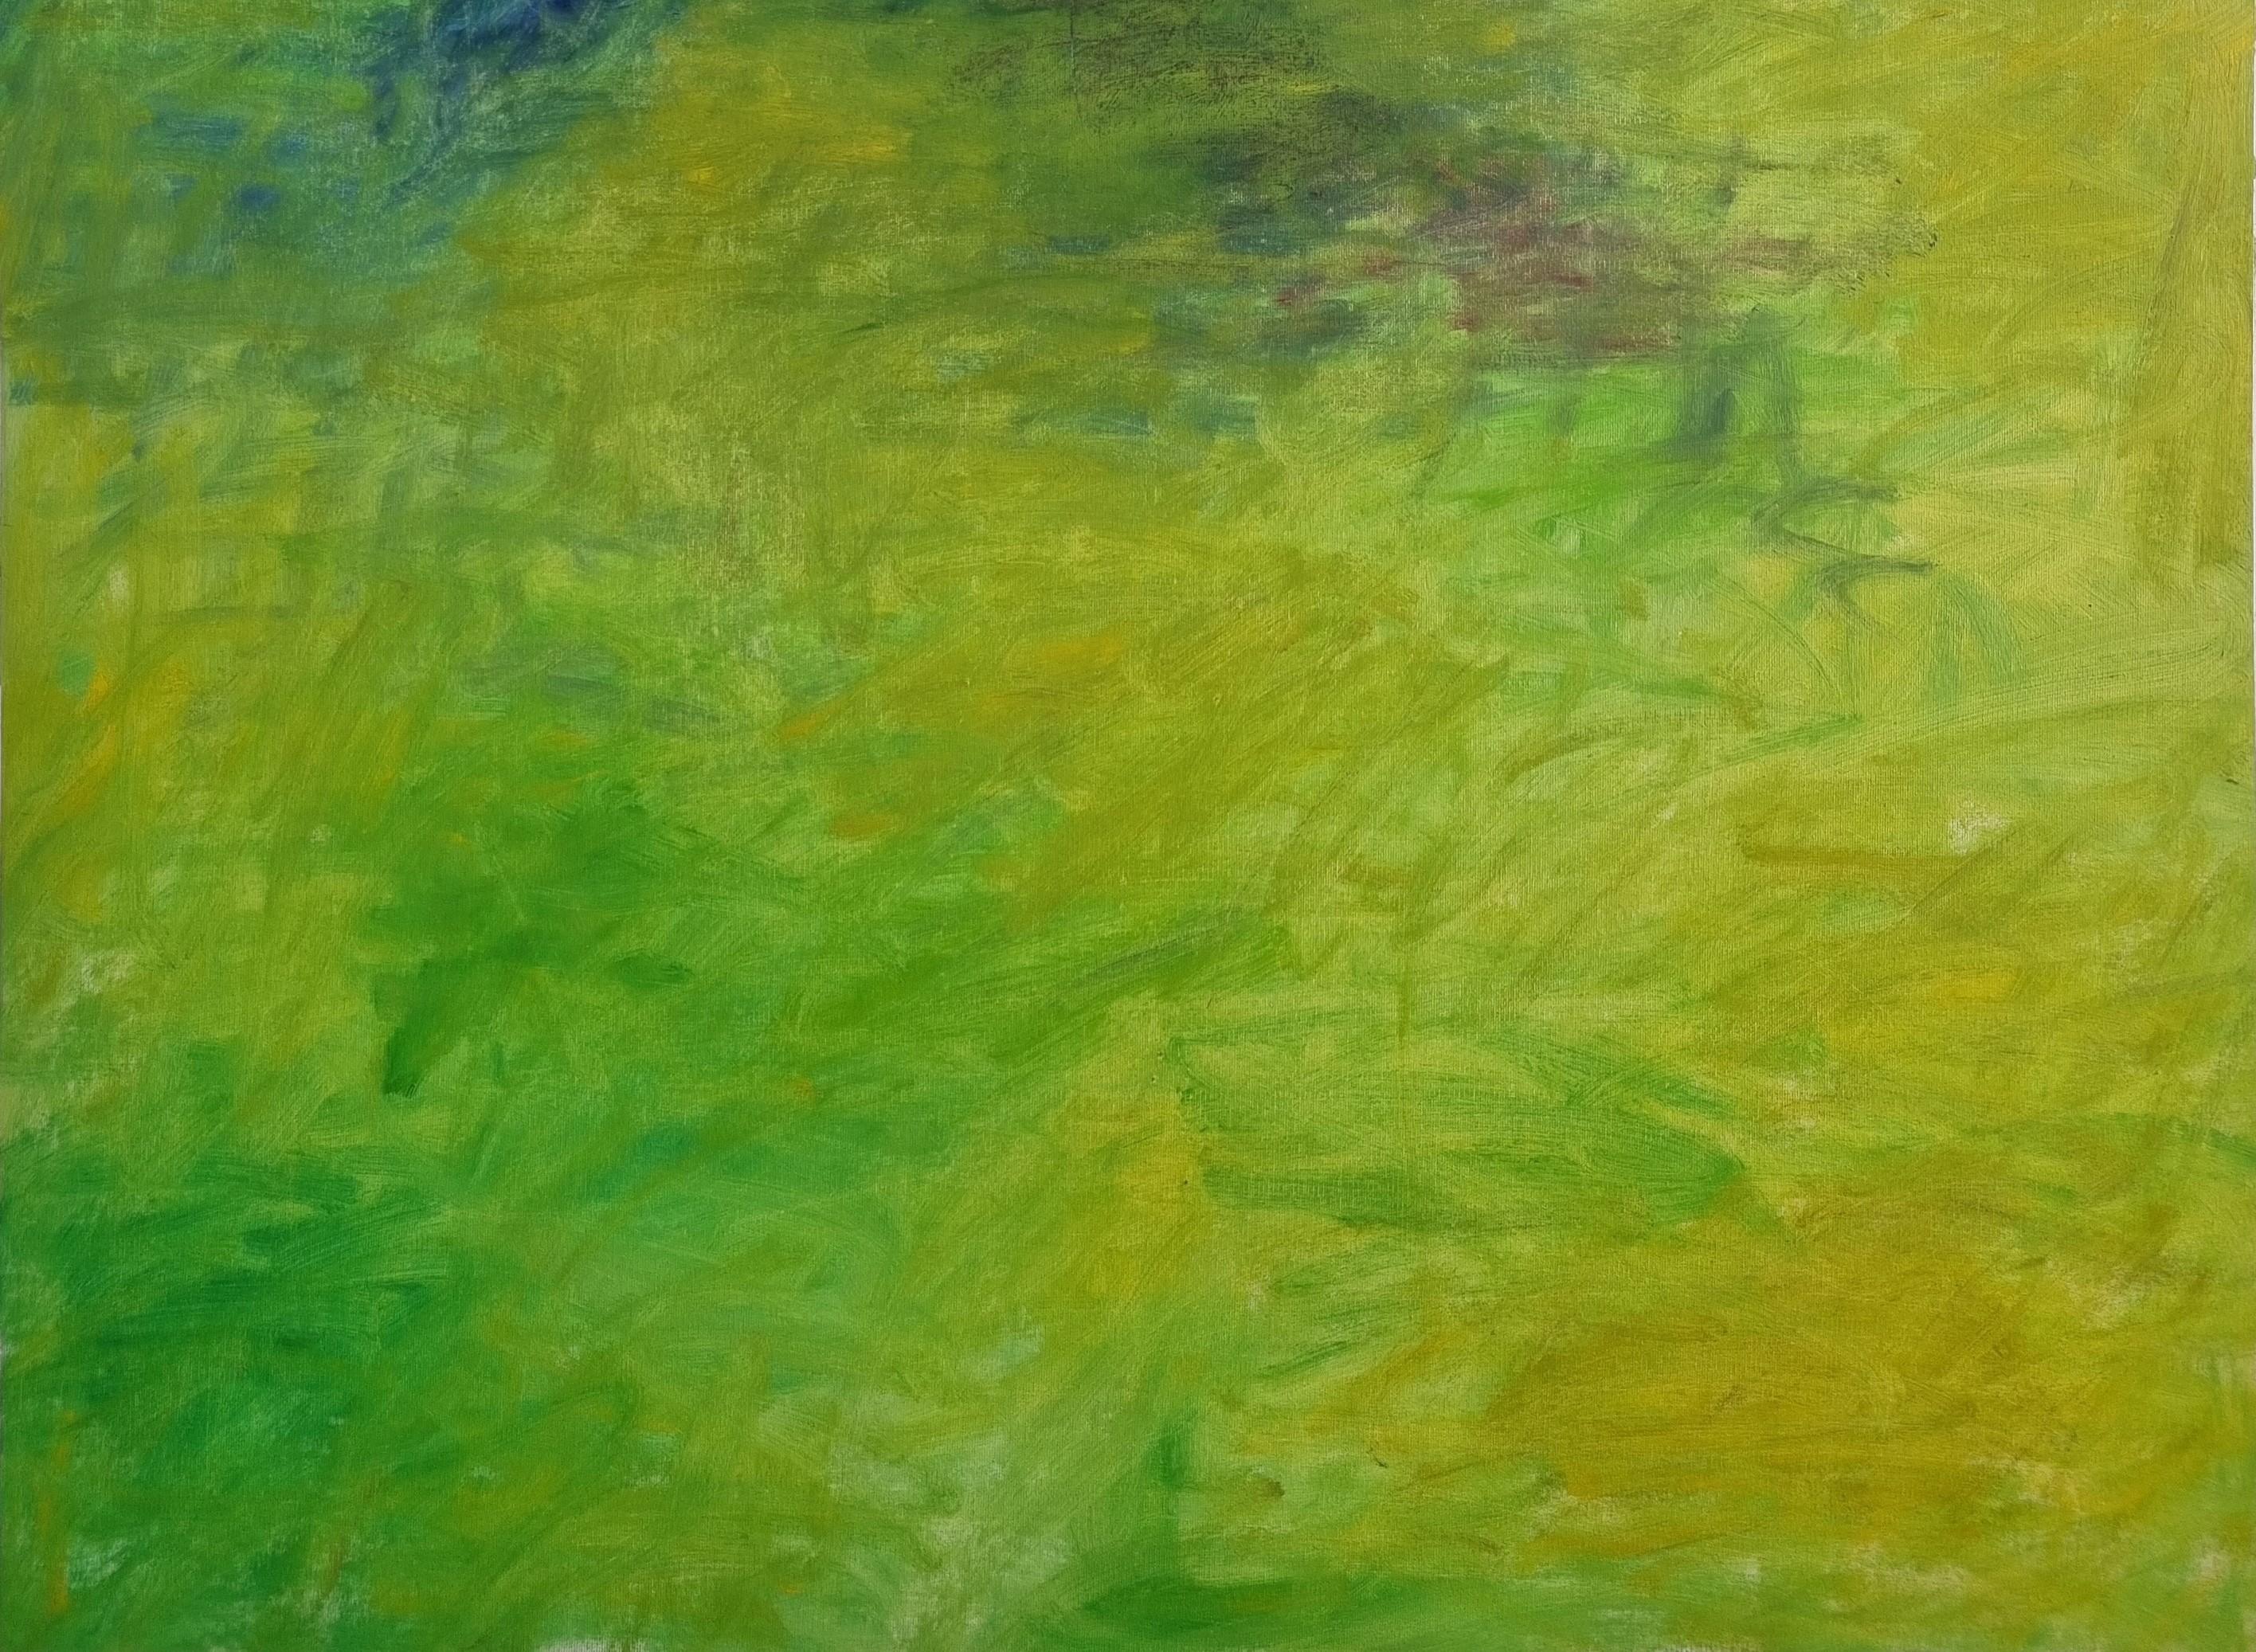 Body in the Field 1 - 21st Century, Landscape, Green, Blue, Painting For Sale 2